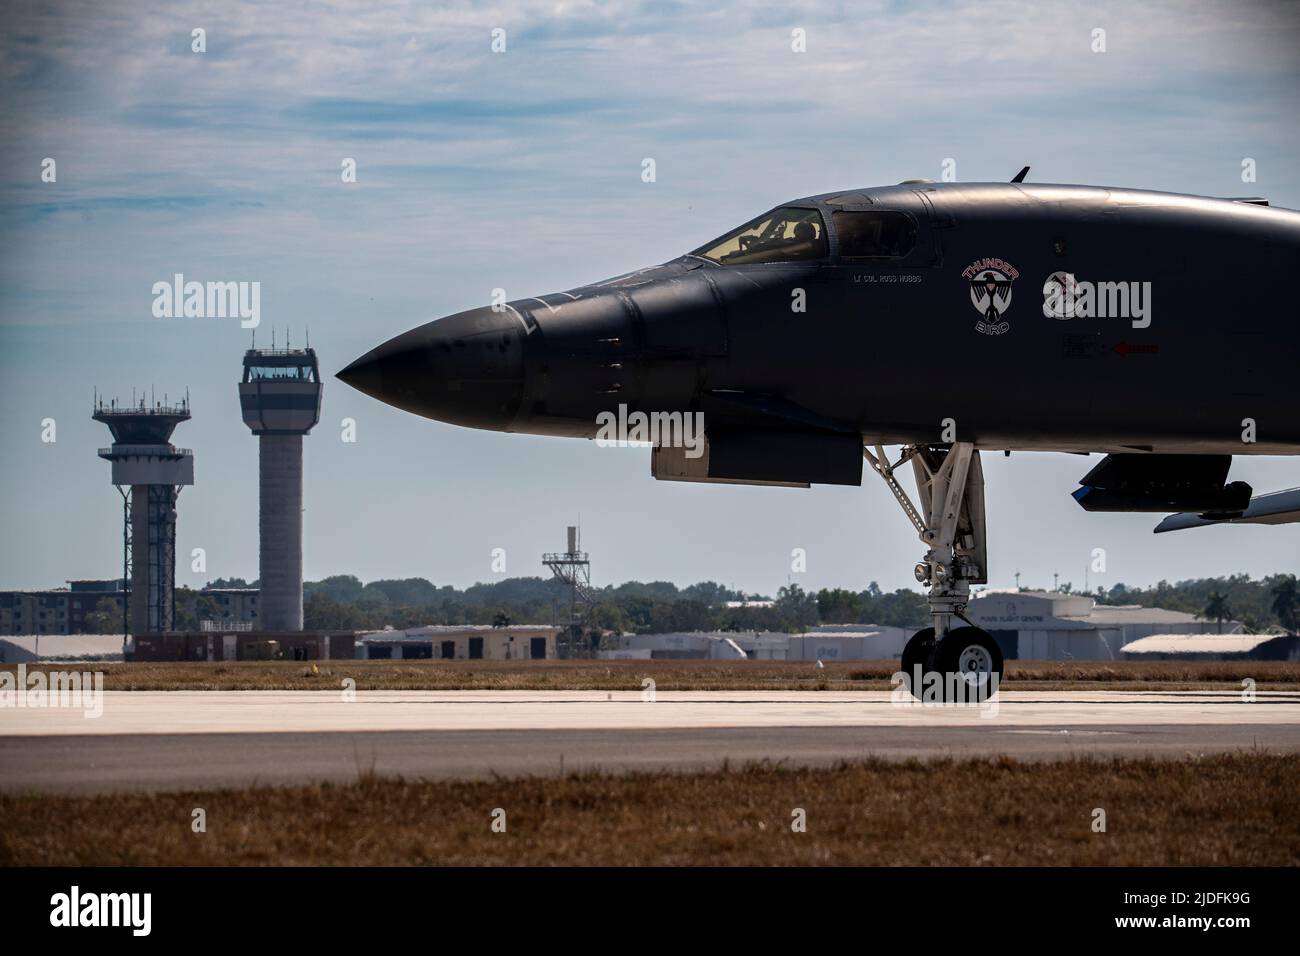 A U.S. Air Force B-1B Lancer attached to the 34th Bomb Squadron, Ellsworth, South Dakota, taxies past the control towers of the Darwin Airport after landing at the Royal Austrailian Air Force Base, Darwin, NT, Austraila, June 20, 2022. Bomber missions contribute to joint force lethality and deter aggression in the Indo-Pacific by demonstrating United States Air Force ability to operate anywhere in the world at any time in support of the National Defense Strategy. (U.S. Air Force Photo by Technical Sgt. Chris Hibben) Stock Photo